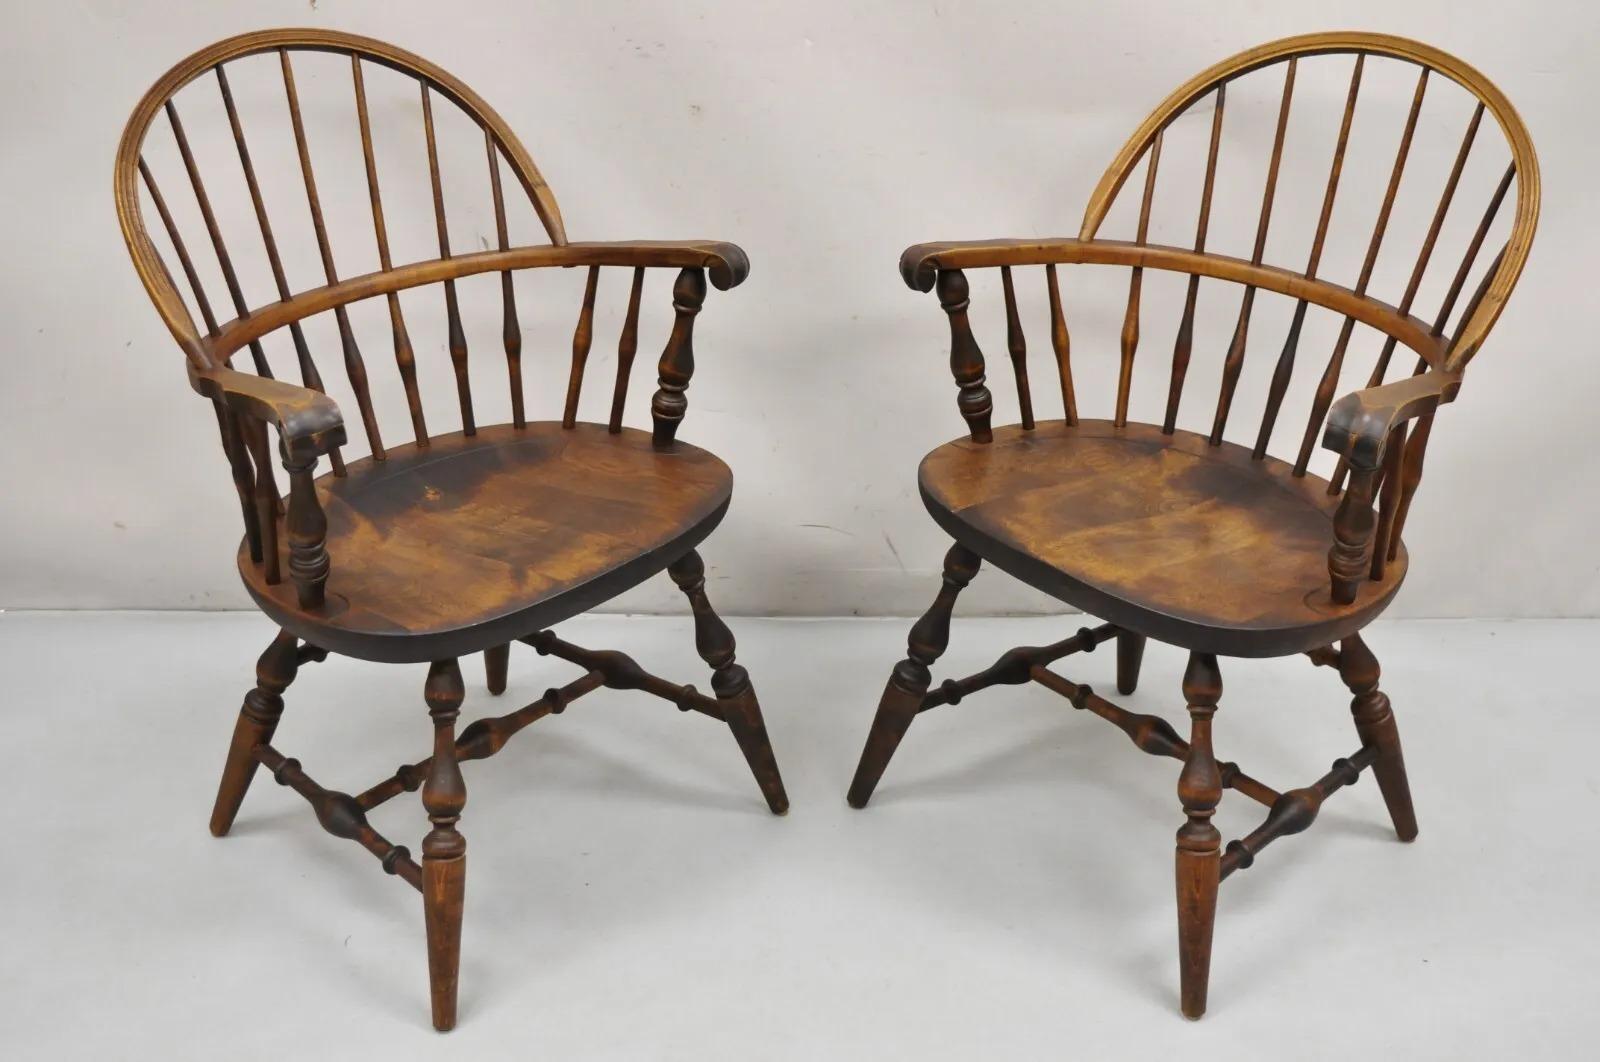 Nichols & Stone Rock Maple Wood Bowback Colonial Windsor Arm Chairs - a Pair For Sale 5